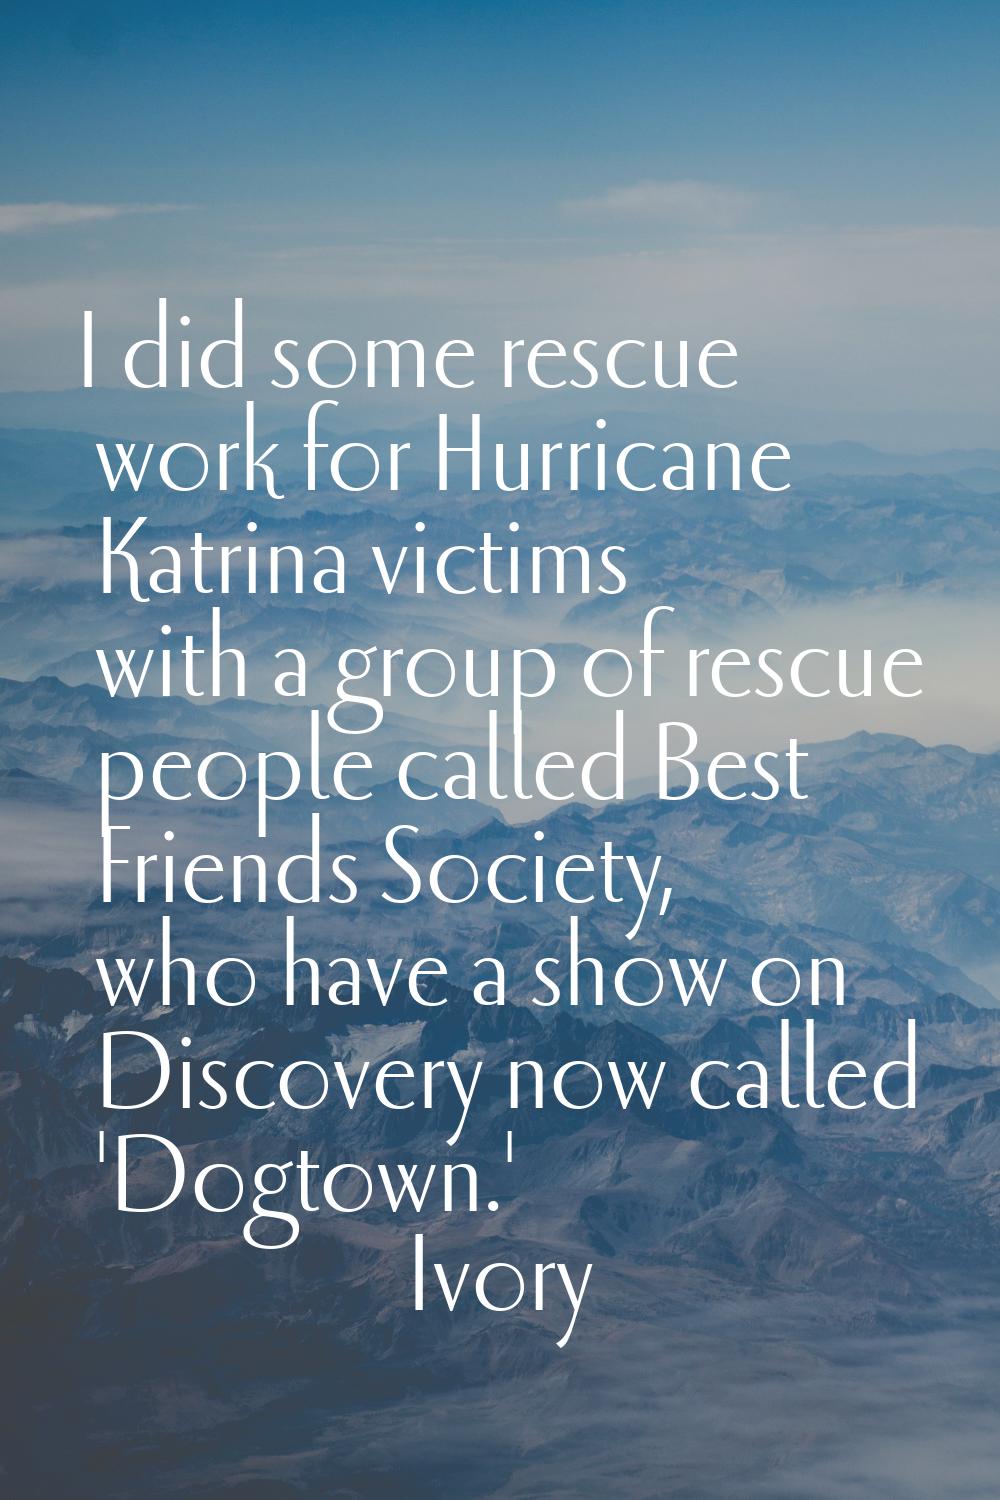 I did some rescue work for Hurricane Katrina victims with a group of rescue people called Best Frie